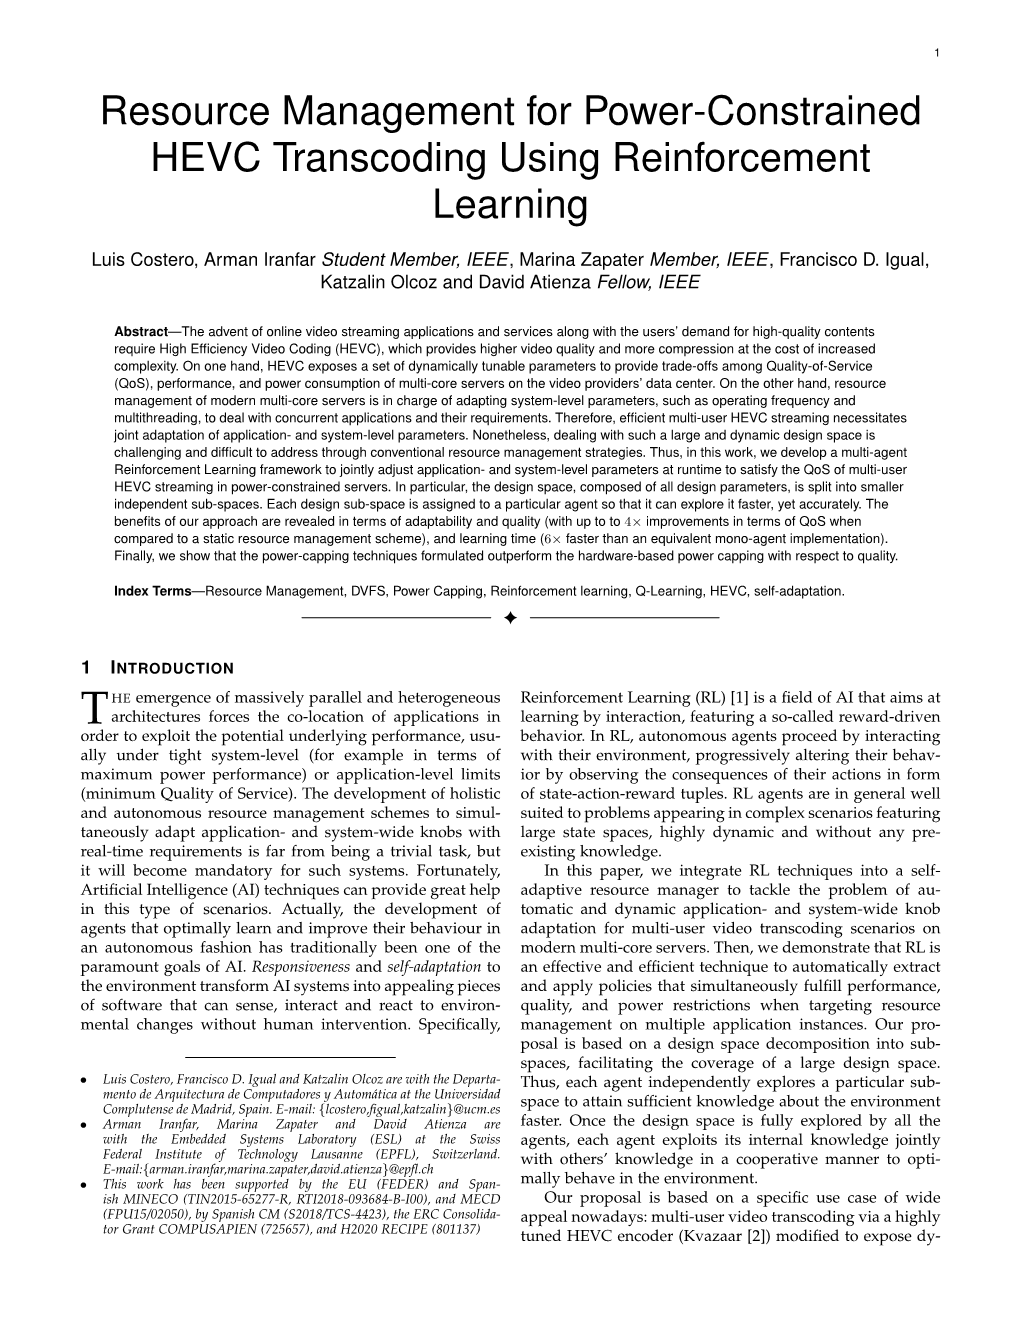 Resource Management for Power-Constrained HEVC Transcoding Using Reinforcement Learning